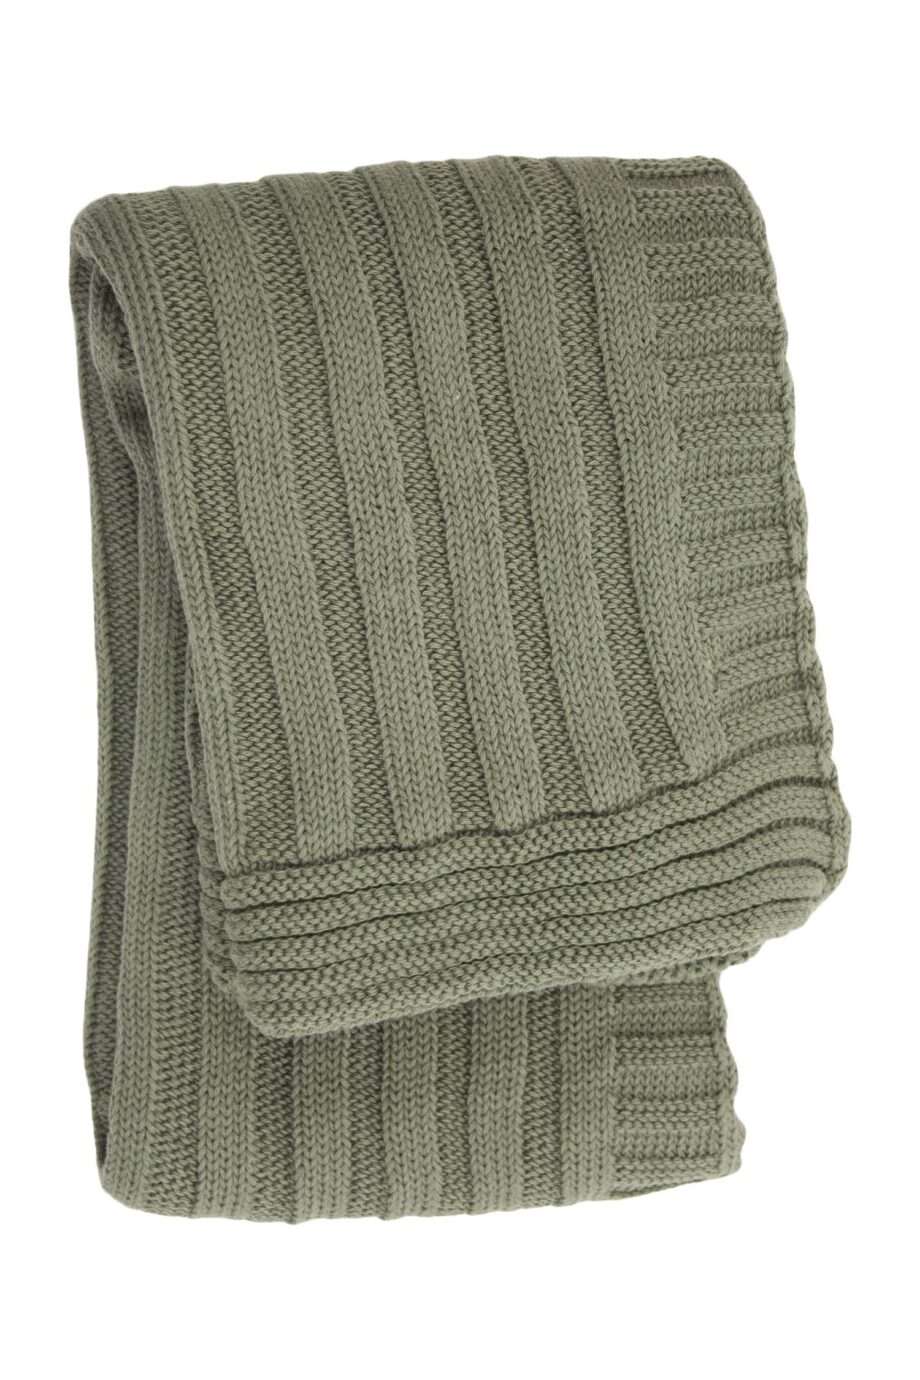 ribs olive green knitted cotton little blanket medium